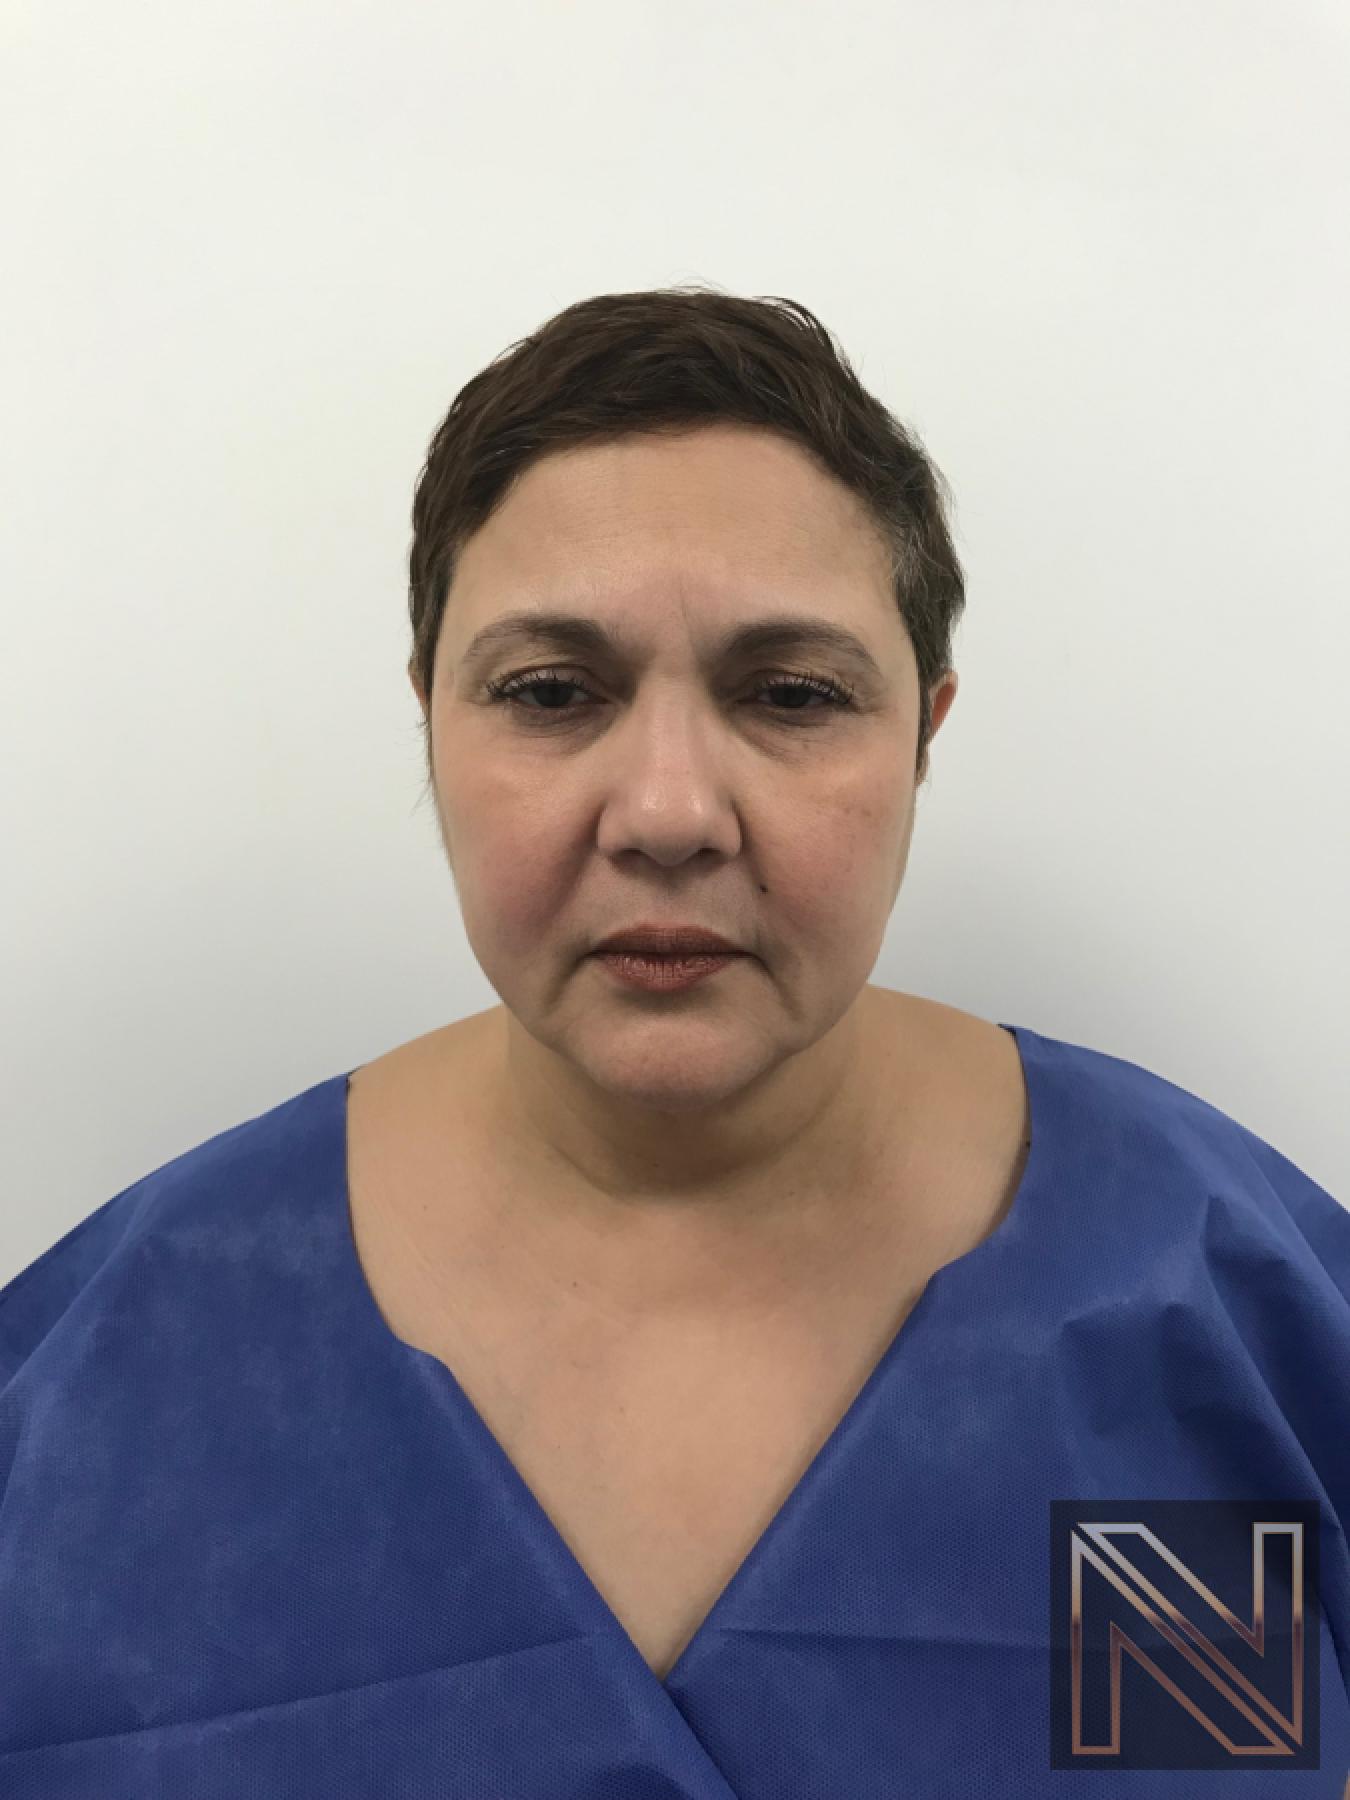 Facelift/Mini Facelift: Patient 1 - Before and After 5